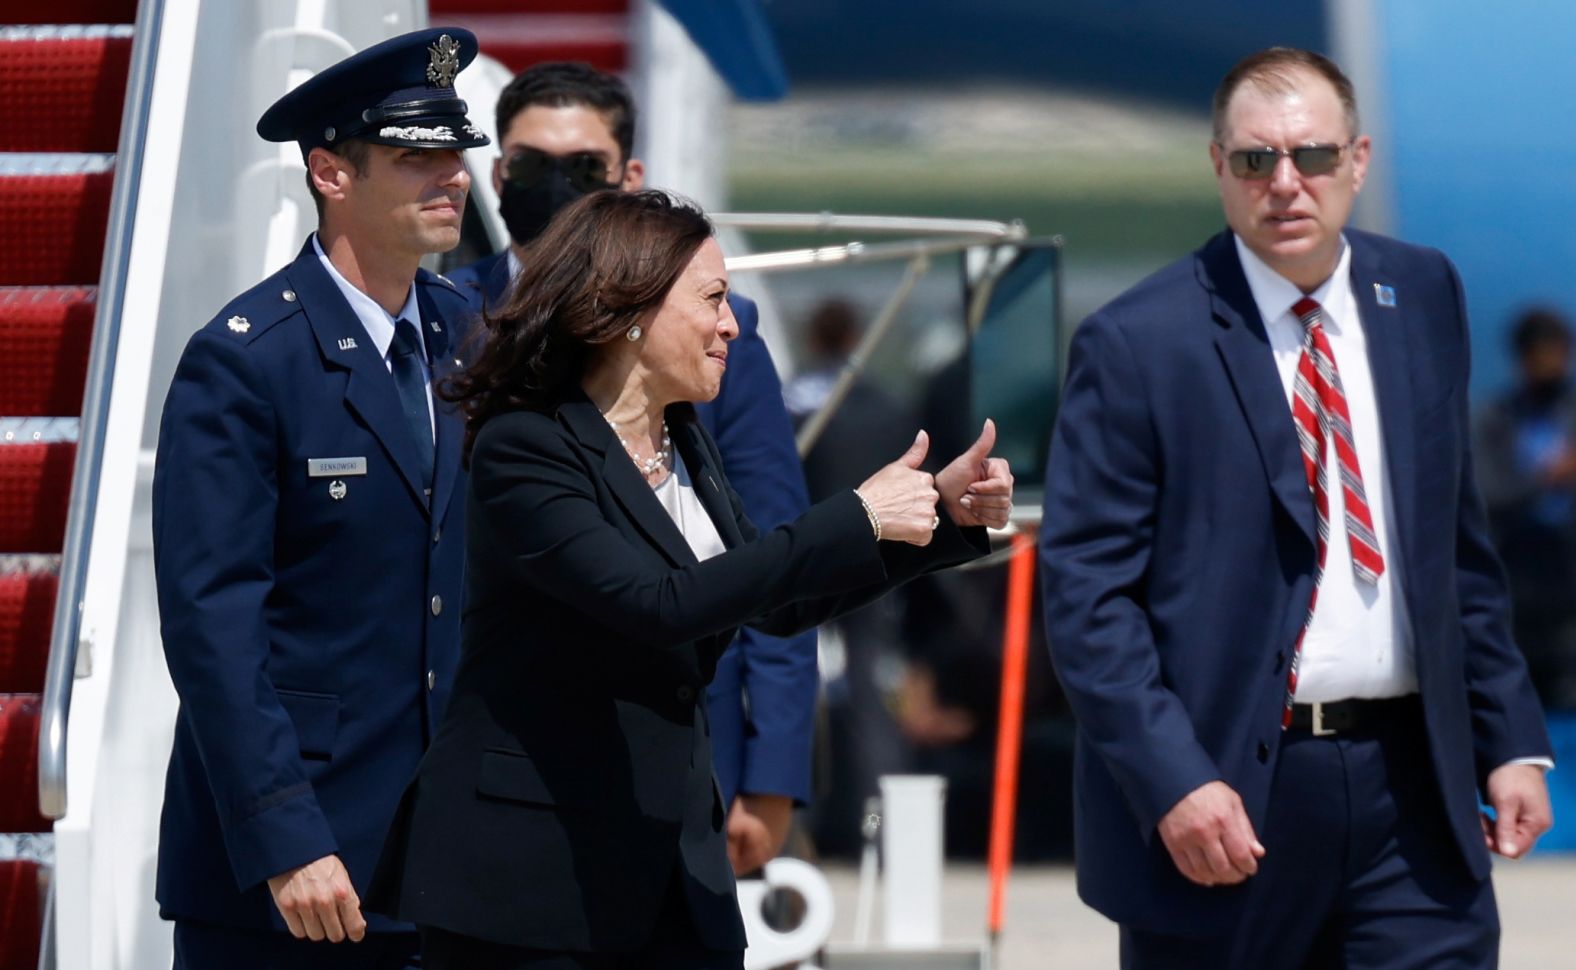 Harris gives the thumbs-up gesture as she gets off the Air Force Two <a href="https://www.cnn.com/2021/06/06/politics/kamala-harris-plane-technical-issue-foreign-trip-guatemala/index.html" target="_blank">after technical difficulties</a> made her change planes at Joint Base Andrews in Maryland on June 6.